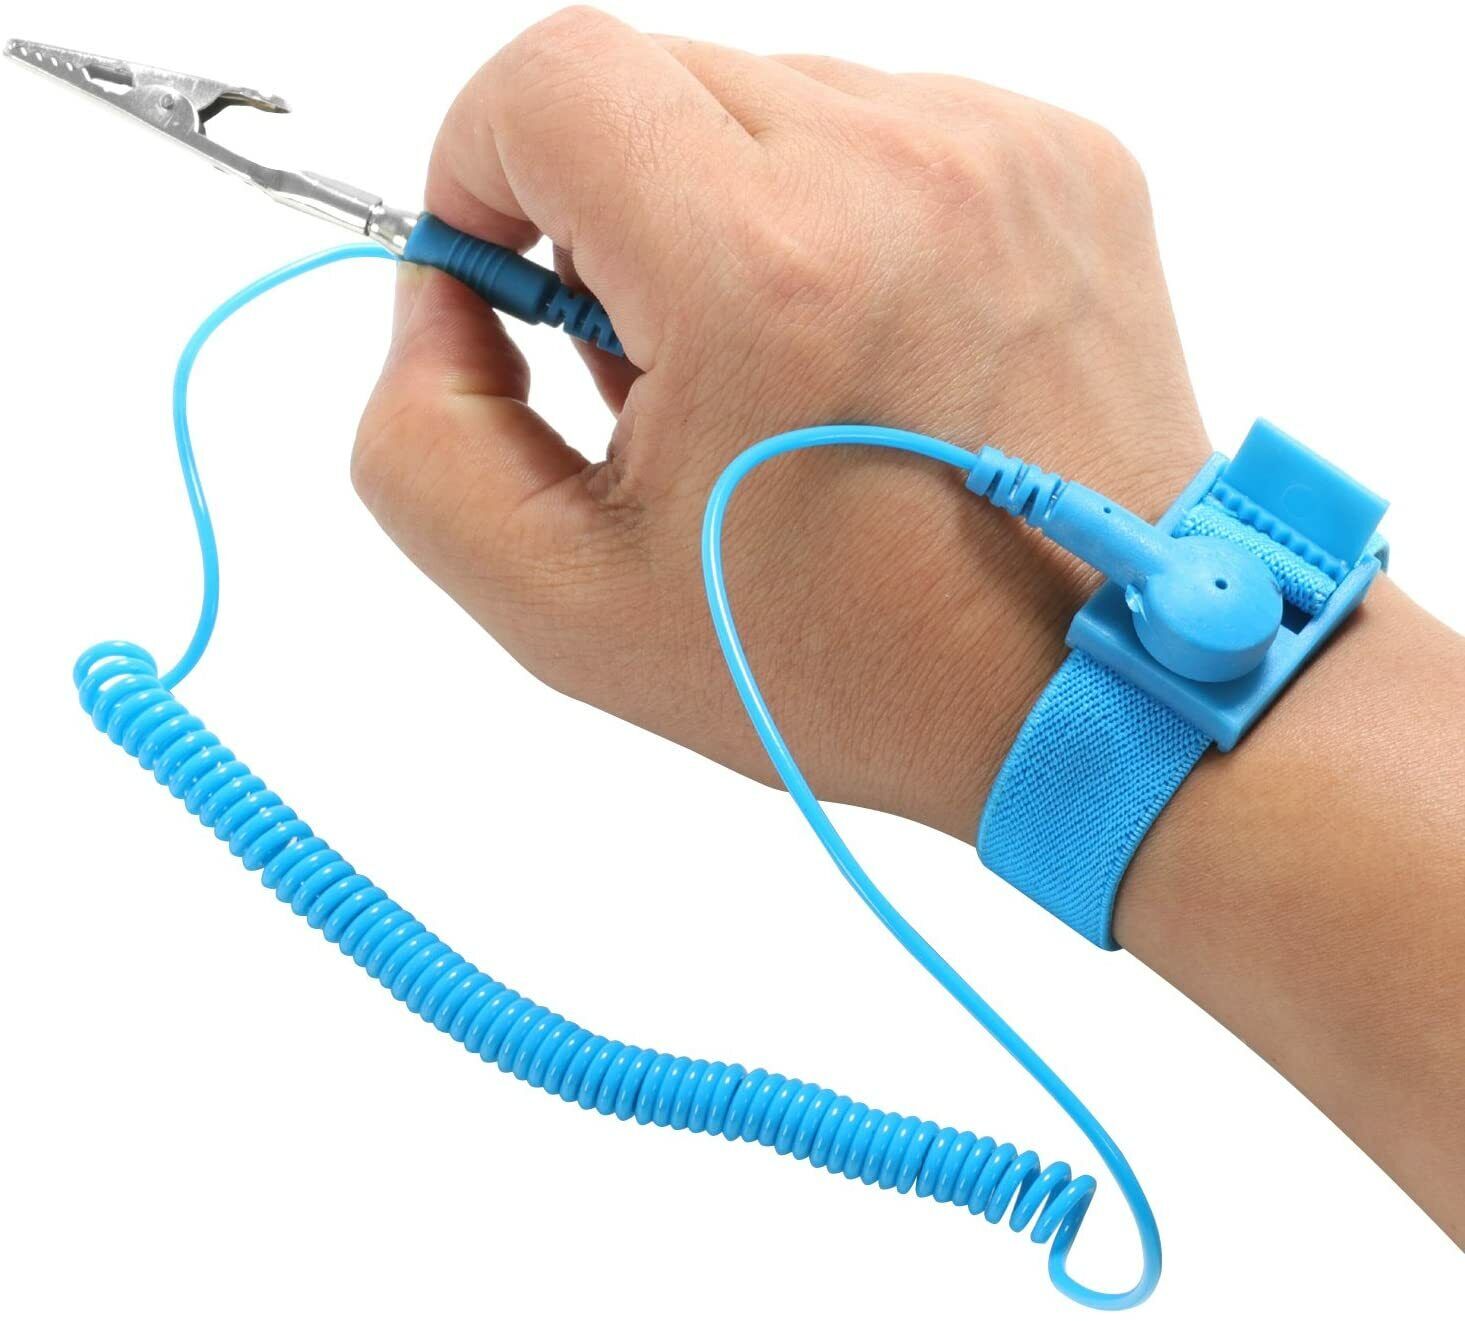 10X Anti-Static Wrist Band ESD Grounding Strap Prevents Static Build Up Blue Unbranded Does Not Apply - фотография #7